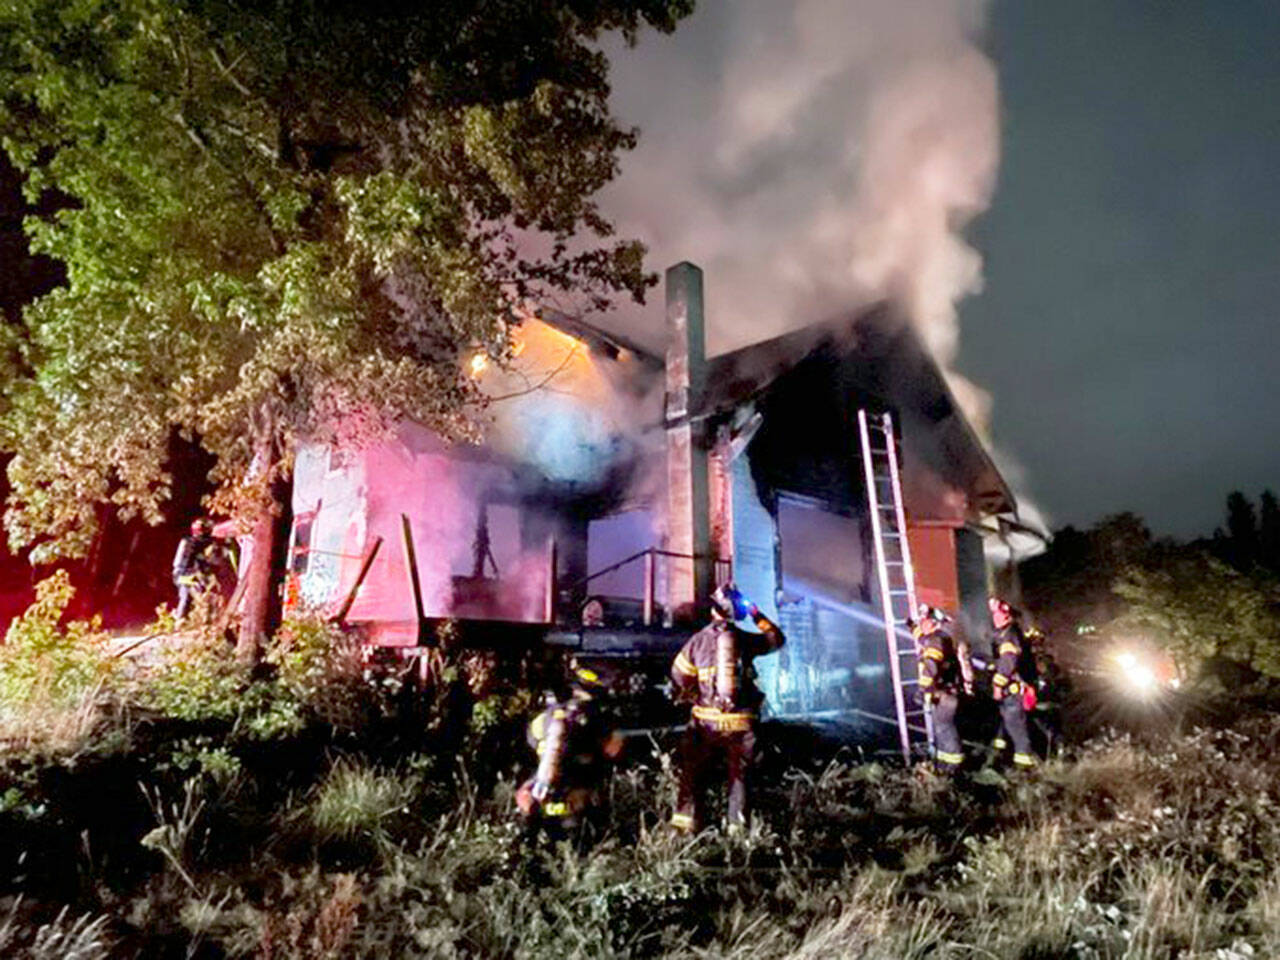 Firefighters battle a blaze Monday, Aug. 7 at a vacant Kent house in the 20400 block of 91st Avenue S. COURTESY PHOTO, Puget Sound Fire